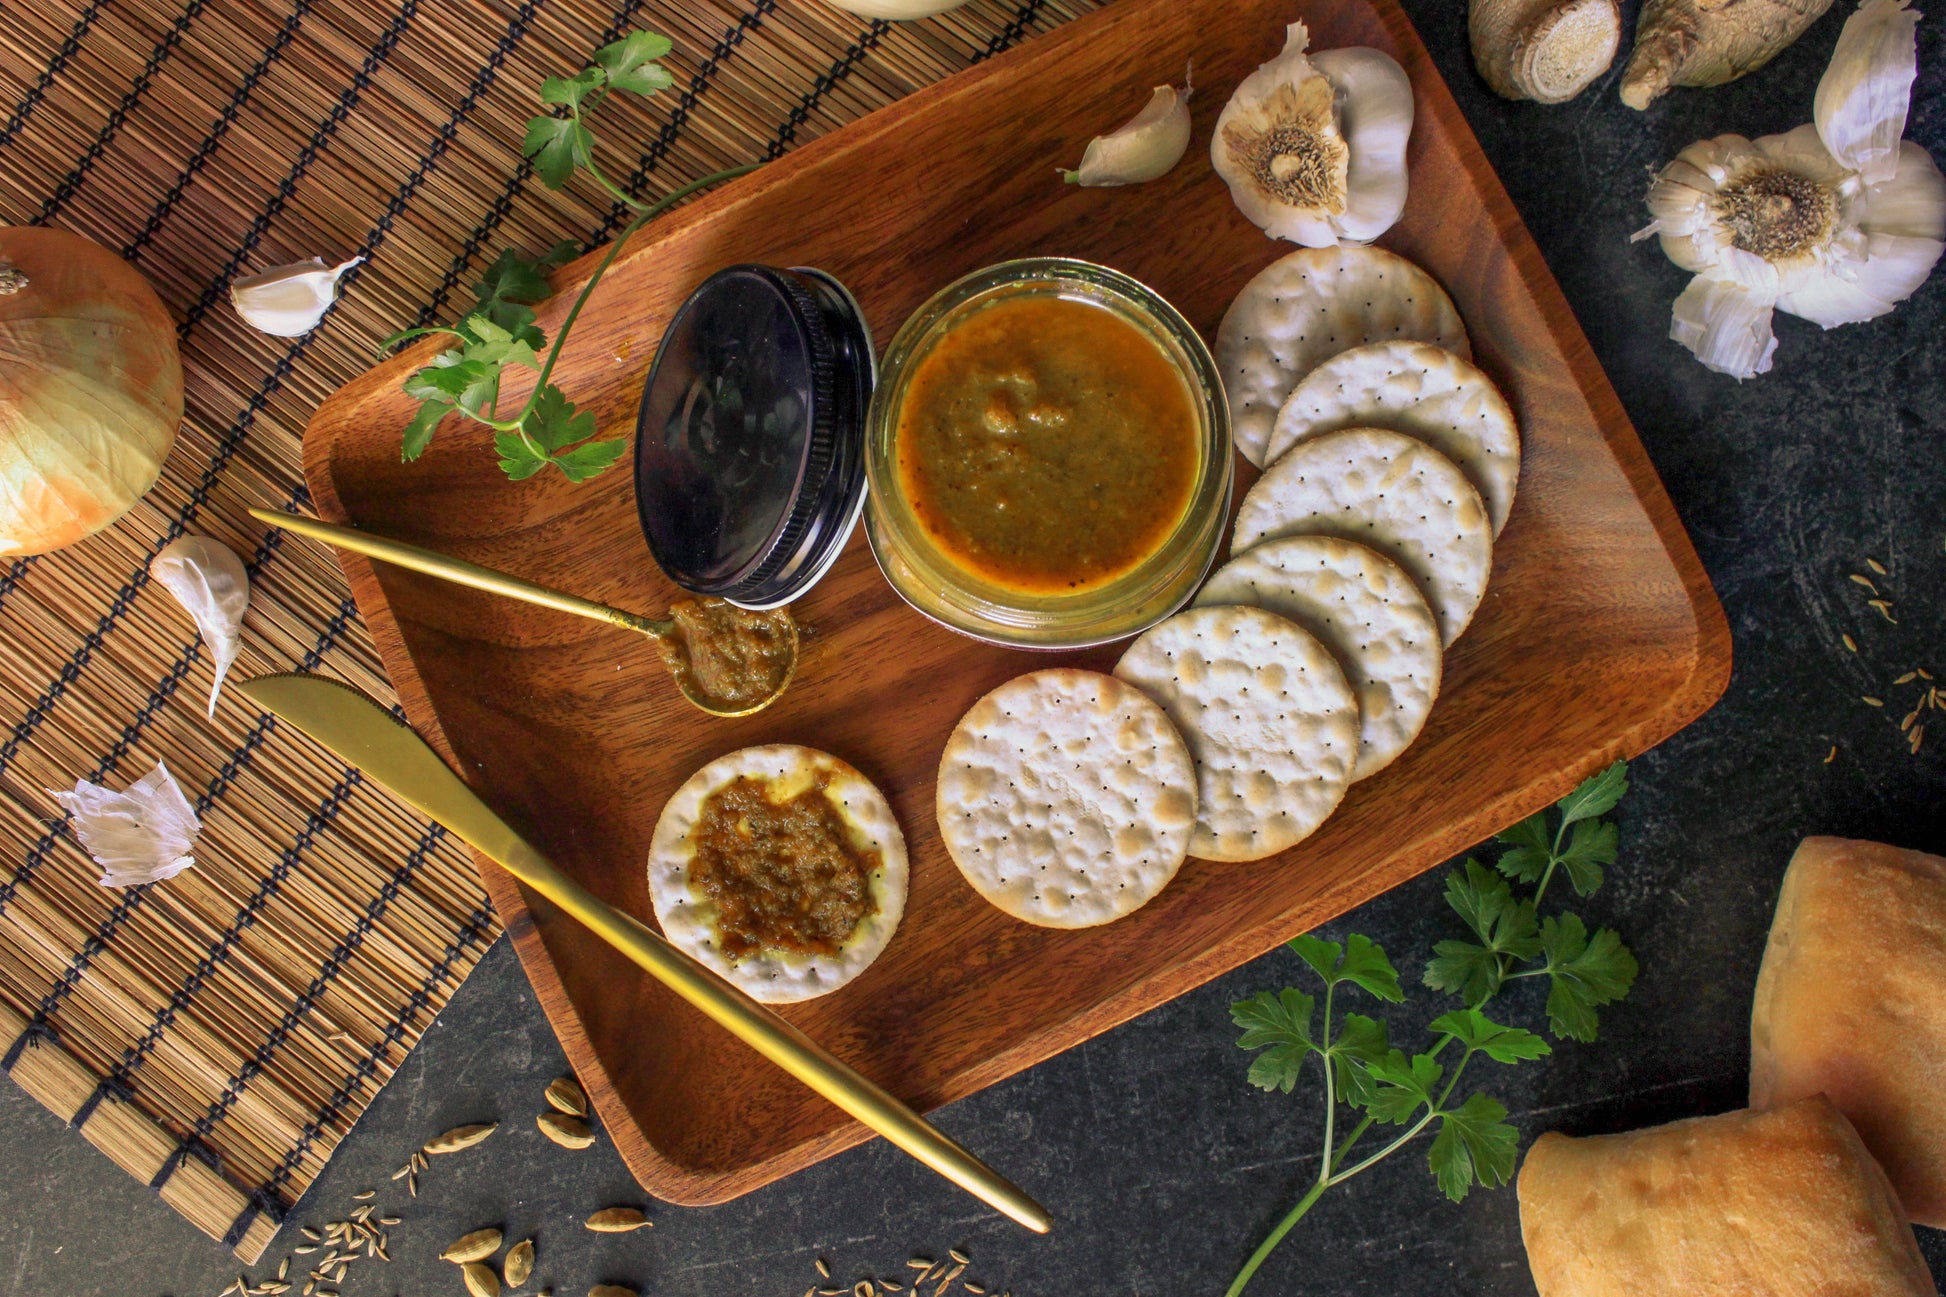 Our gluten-free organic Indian simmer sauce artfully displayed on a serving tray with crackers.